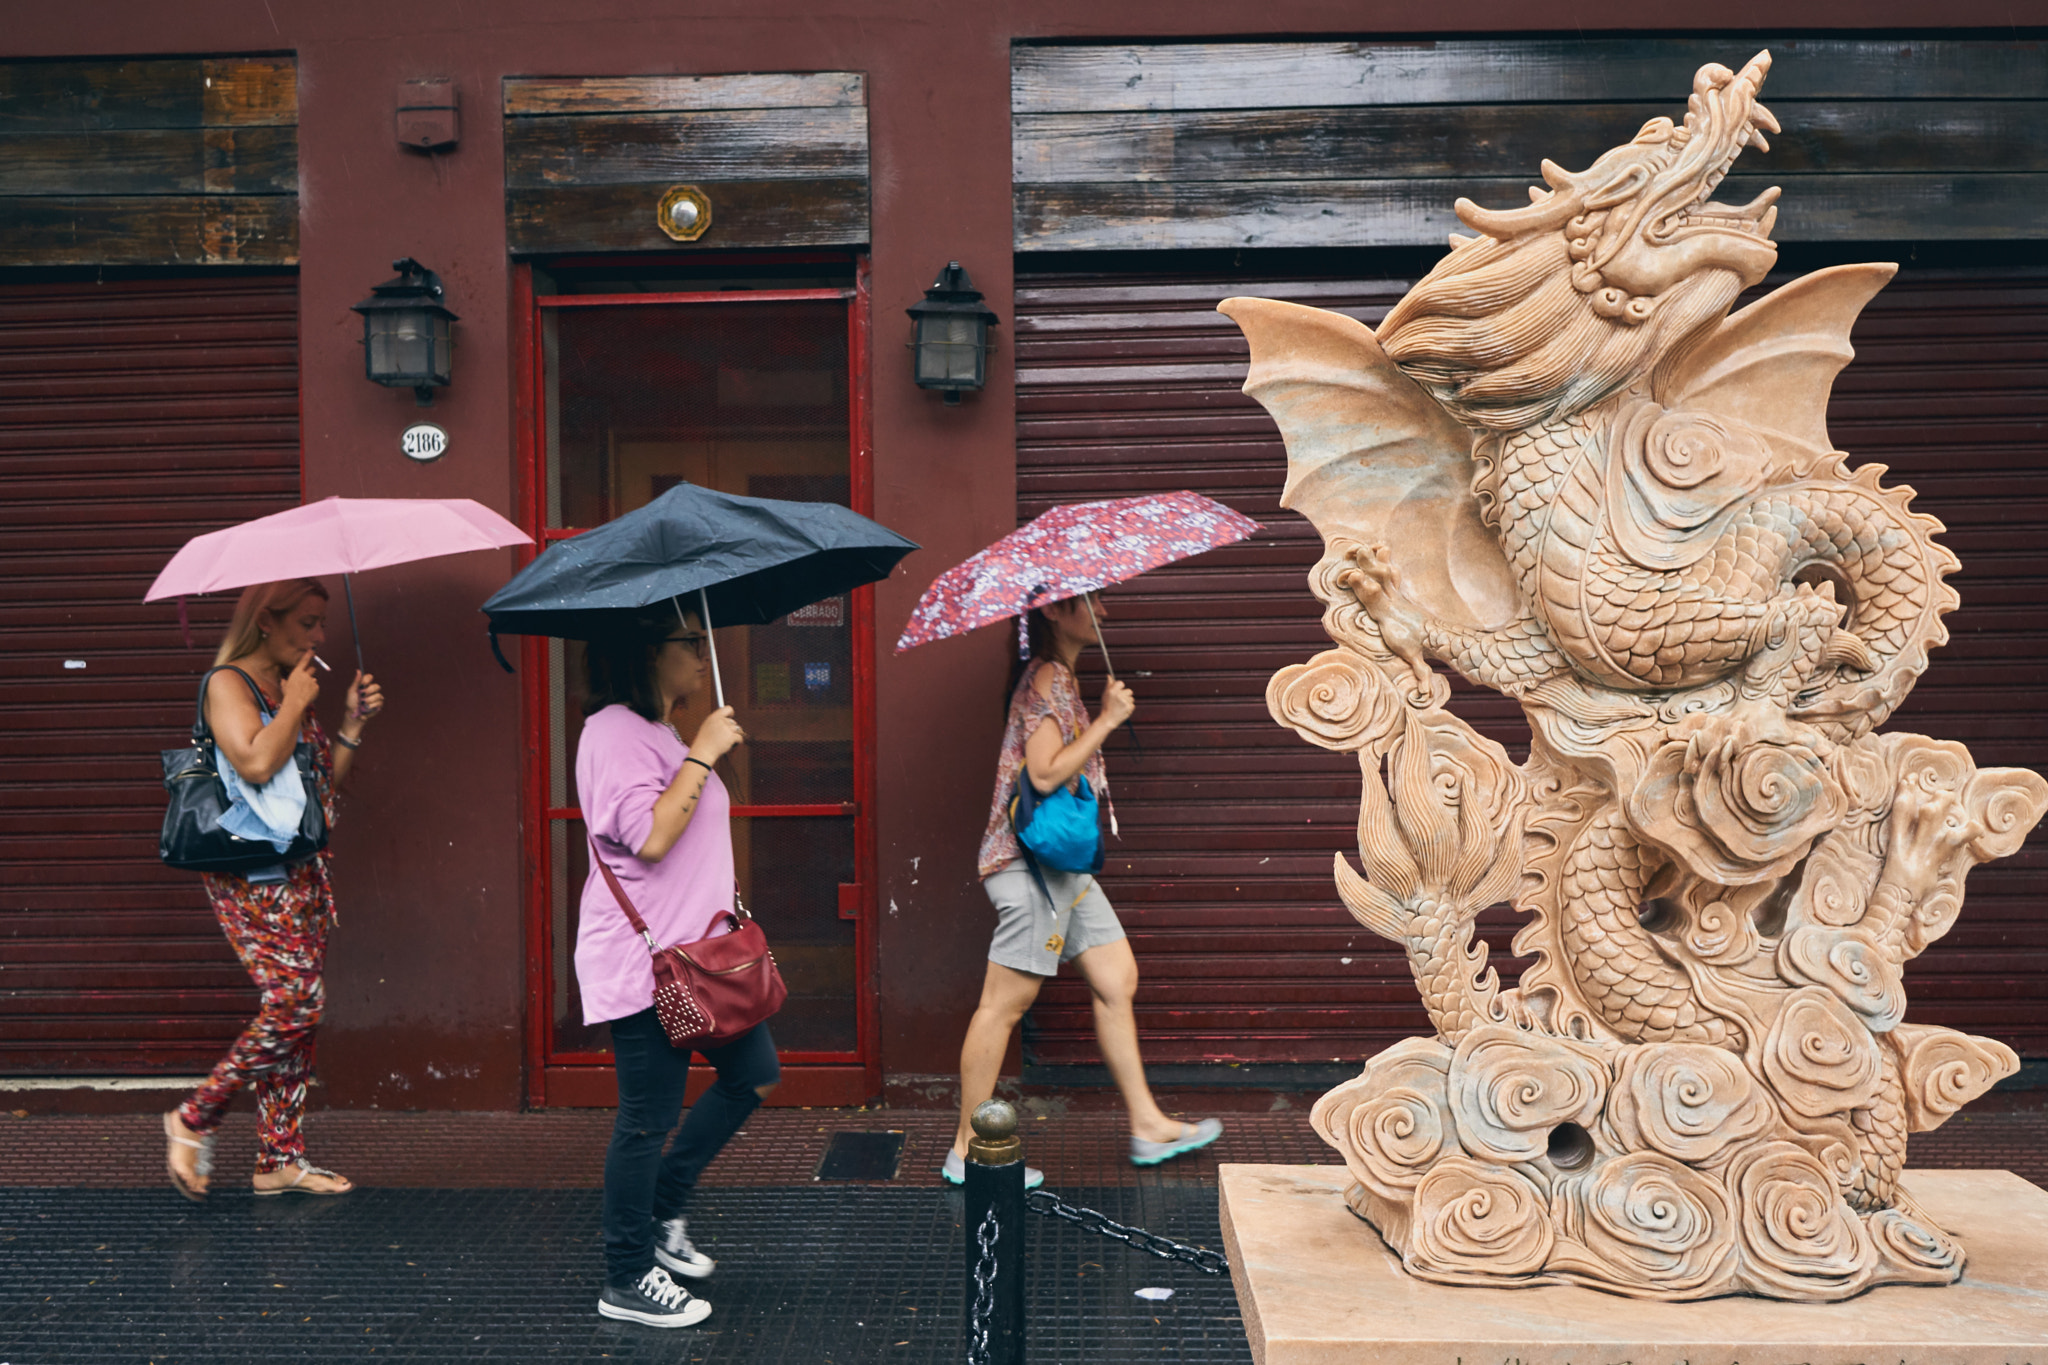 Sony a6000 sample photo. Women with umbrellas and dragon photography